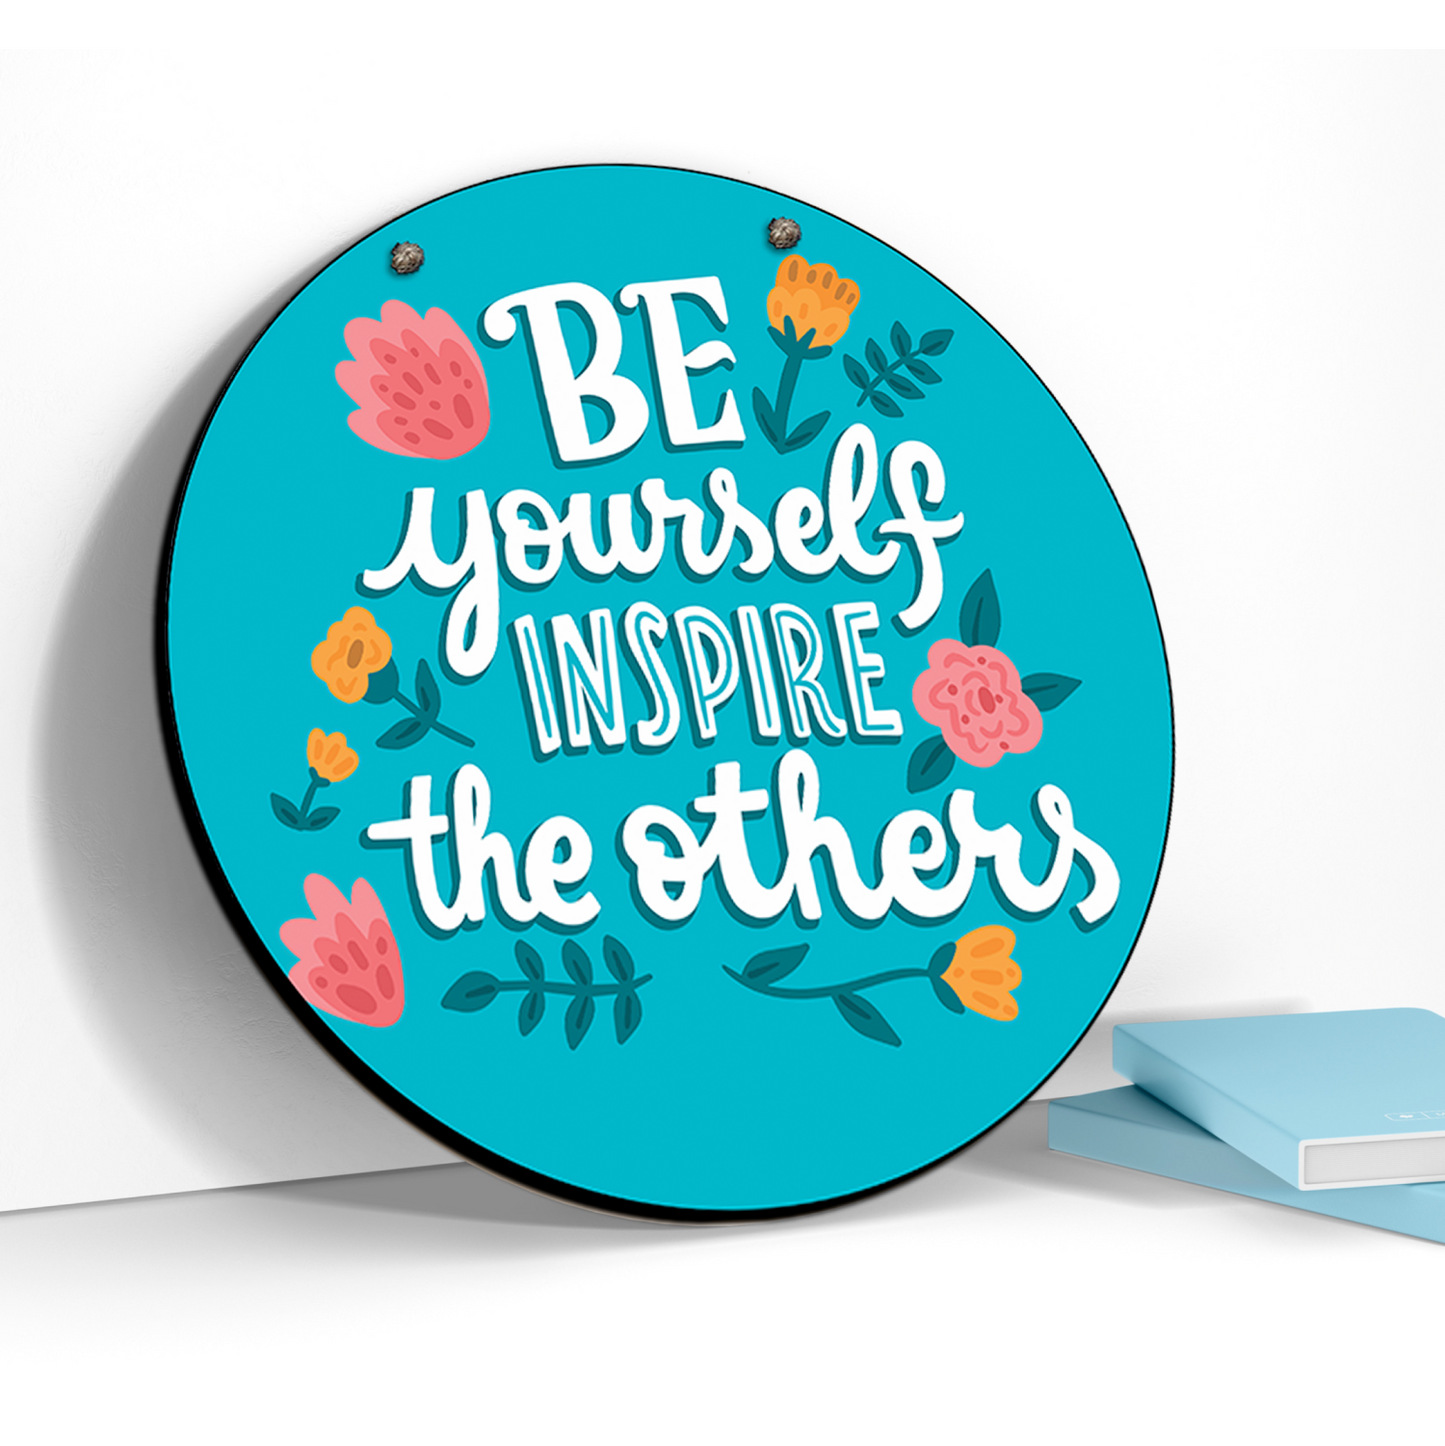 Be Yourself Inspire The Others Wood Print Colorful Wall or Door Hanging